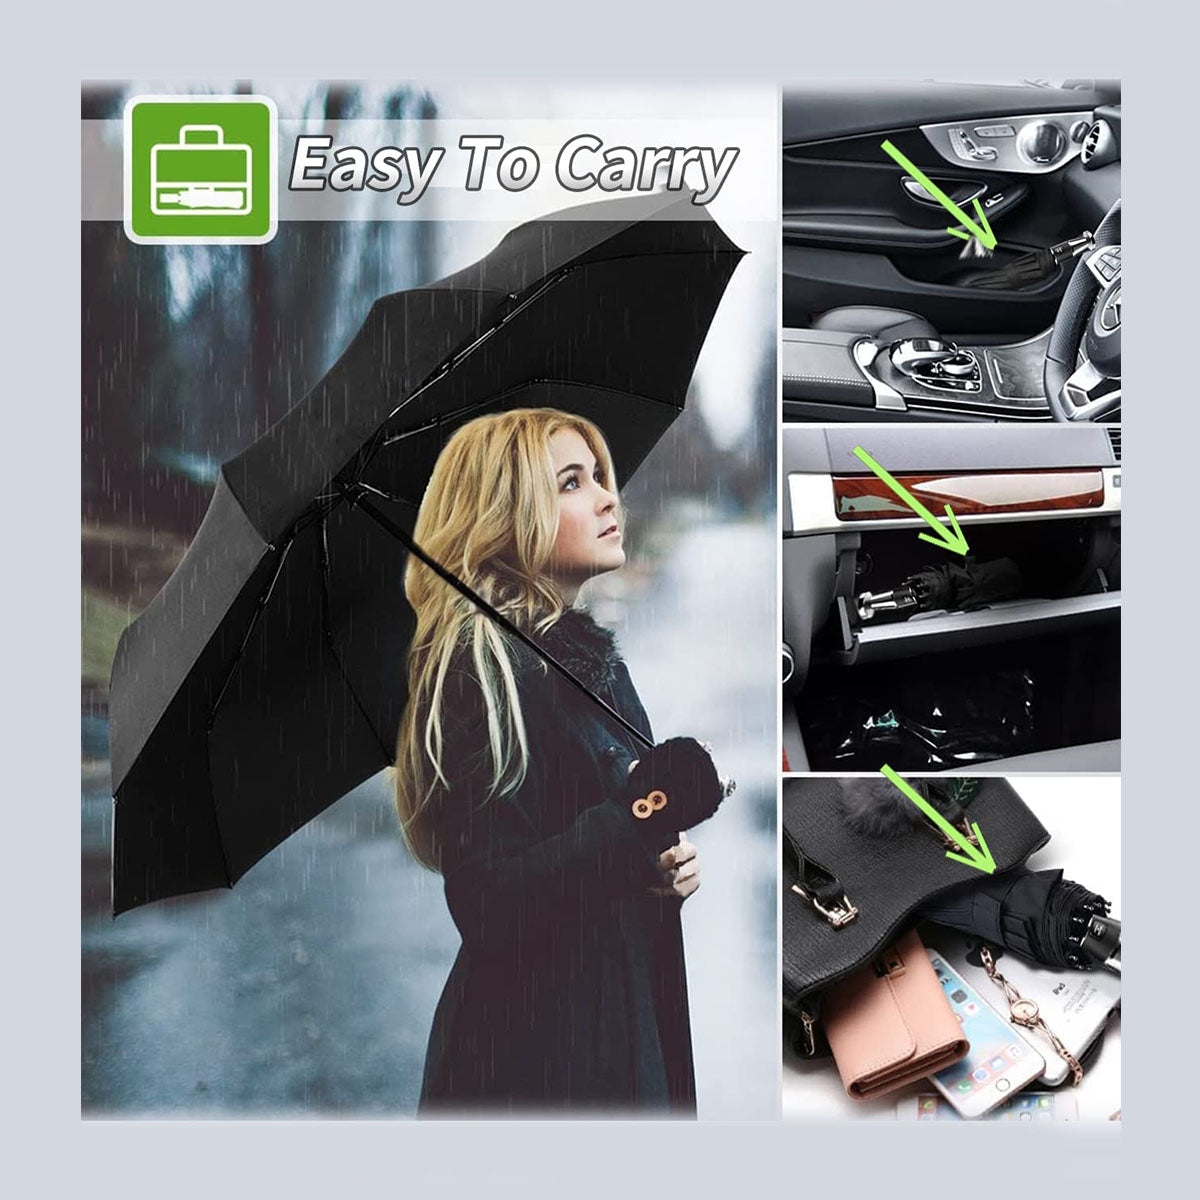 Umbrella for All Cars, 10 Ribs Umbrella Windproof Automatic Folding Umbrella, One-handed use, Rain and Sun Protection, Car Accessories IN13993